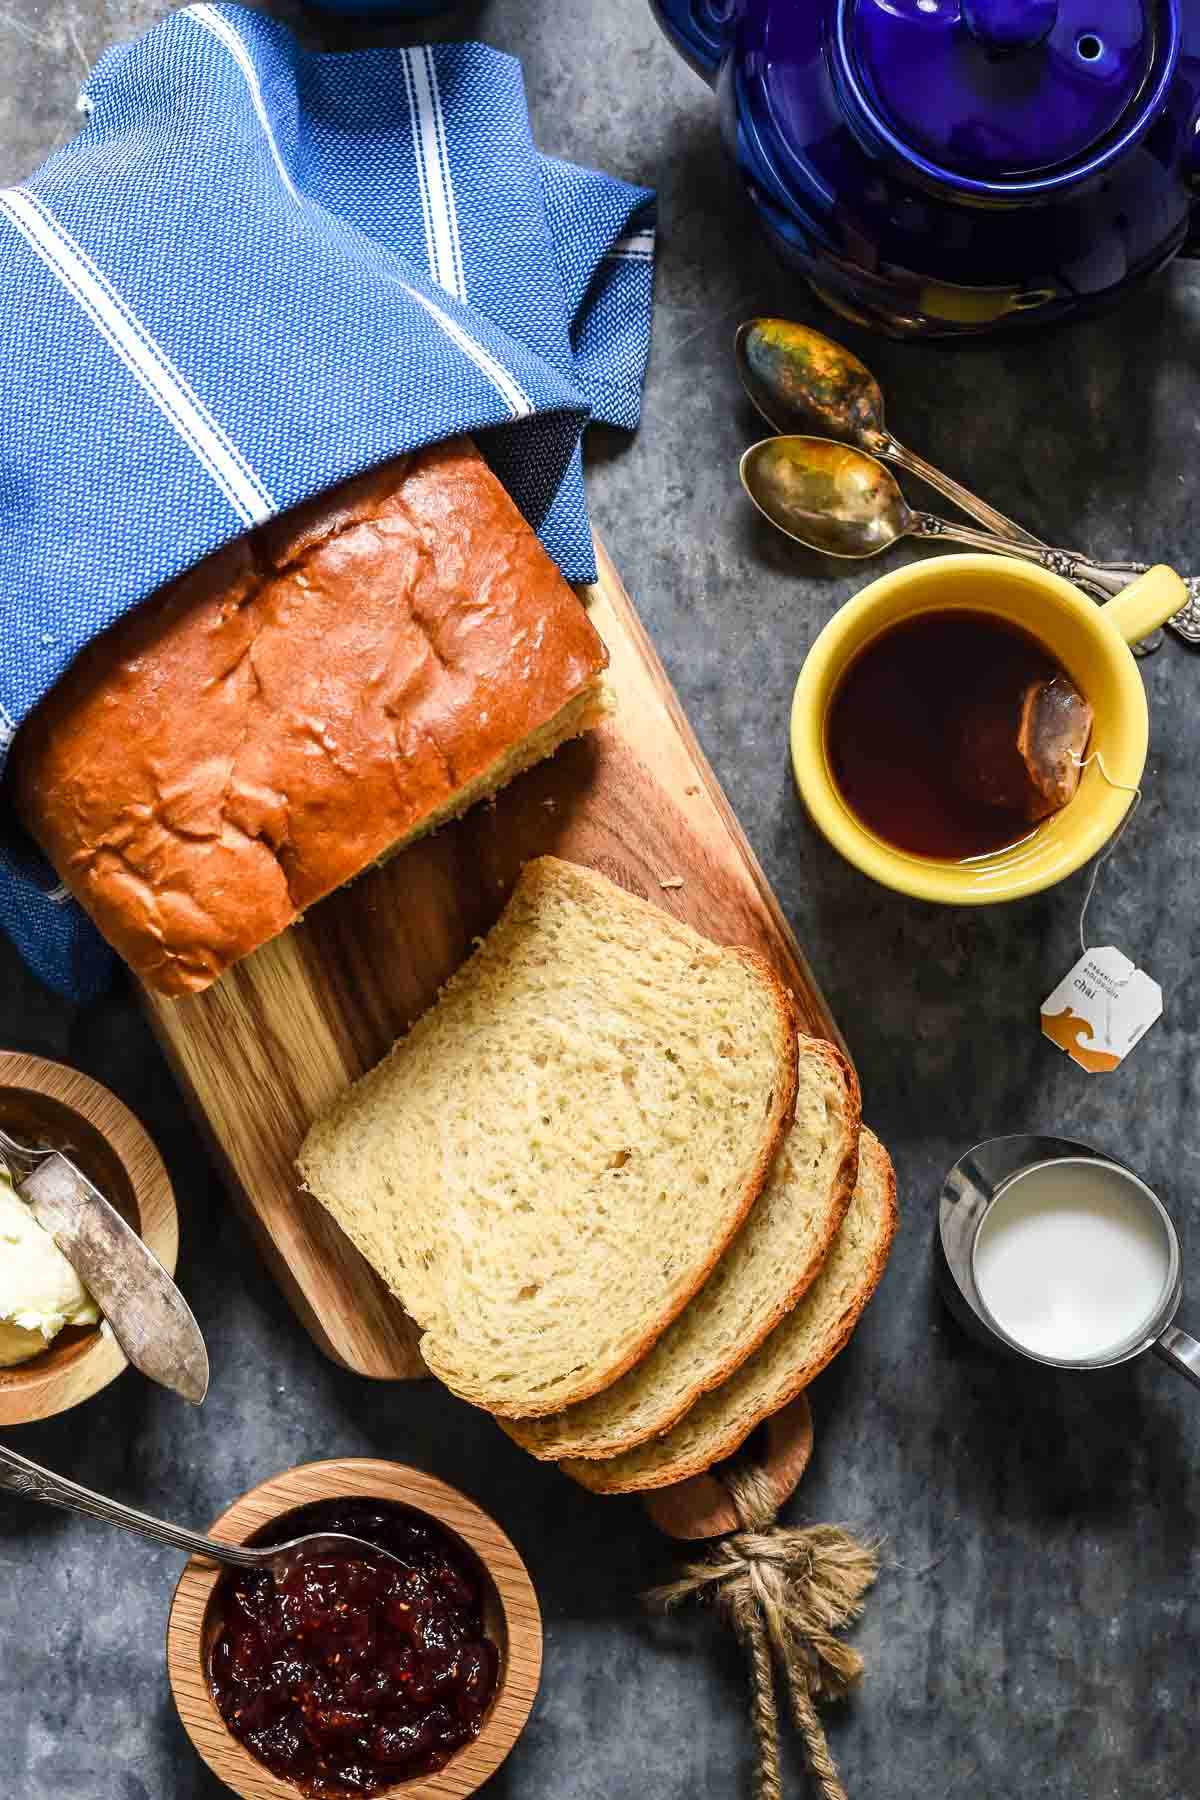 This easy Amish White Bread recipe makes a perfect fluffy, tender bread for sandwiches or jam!